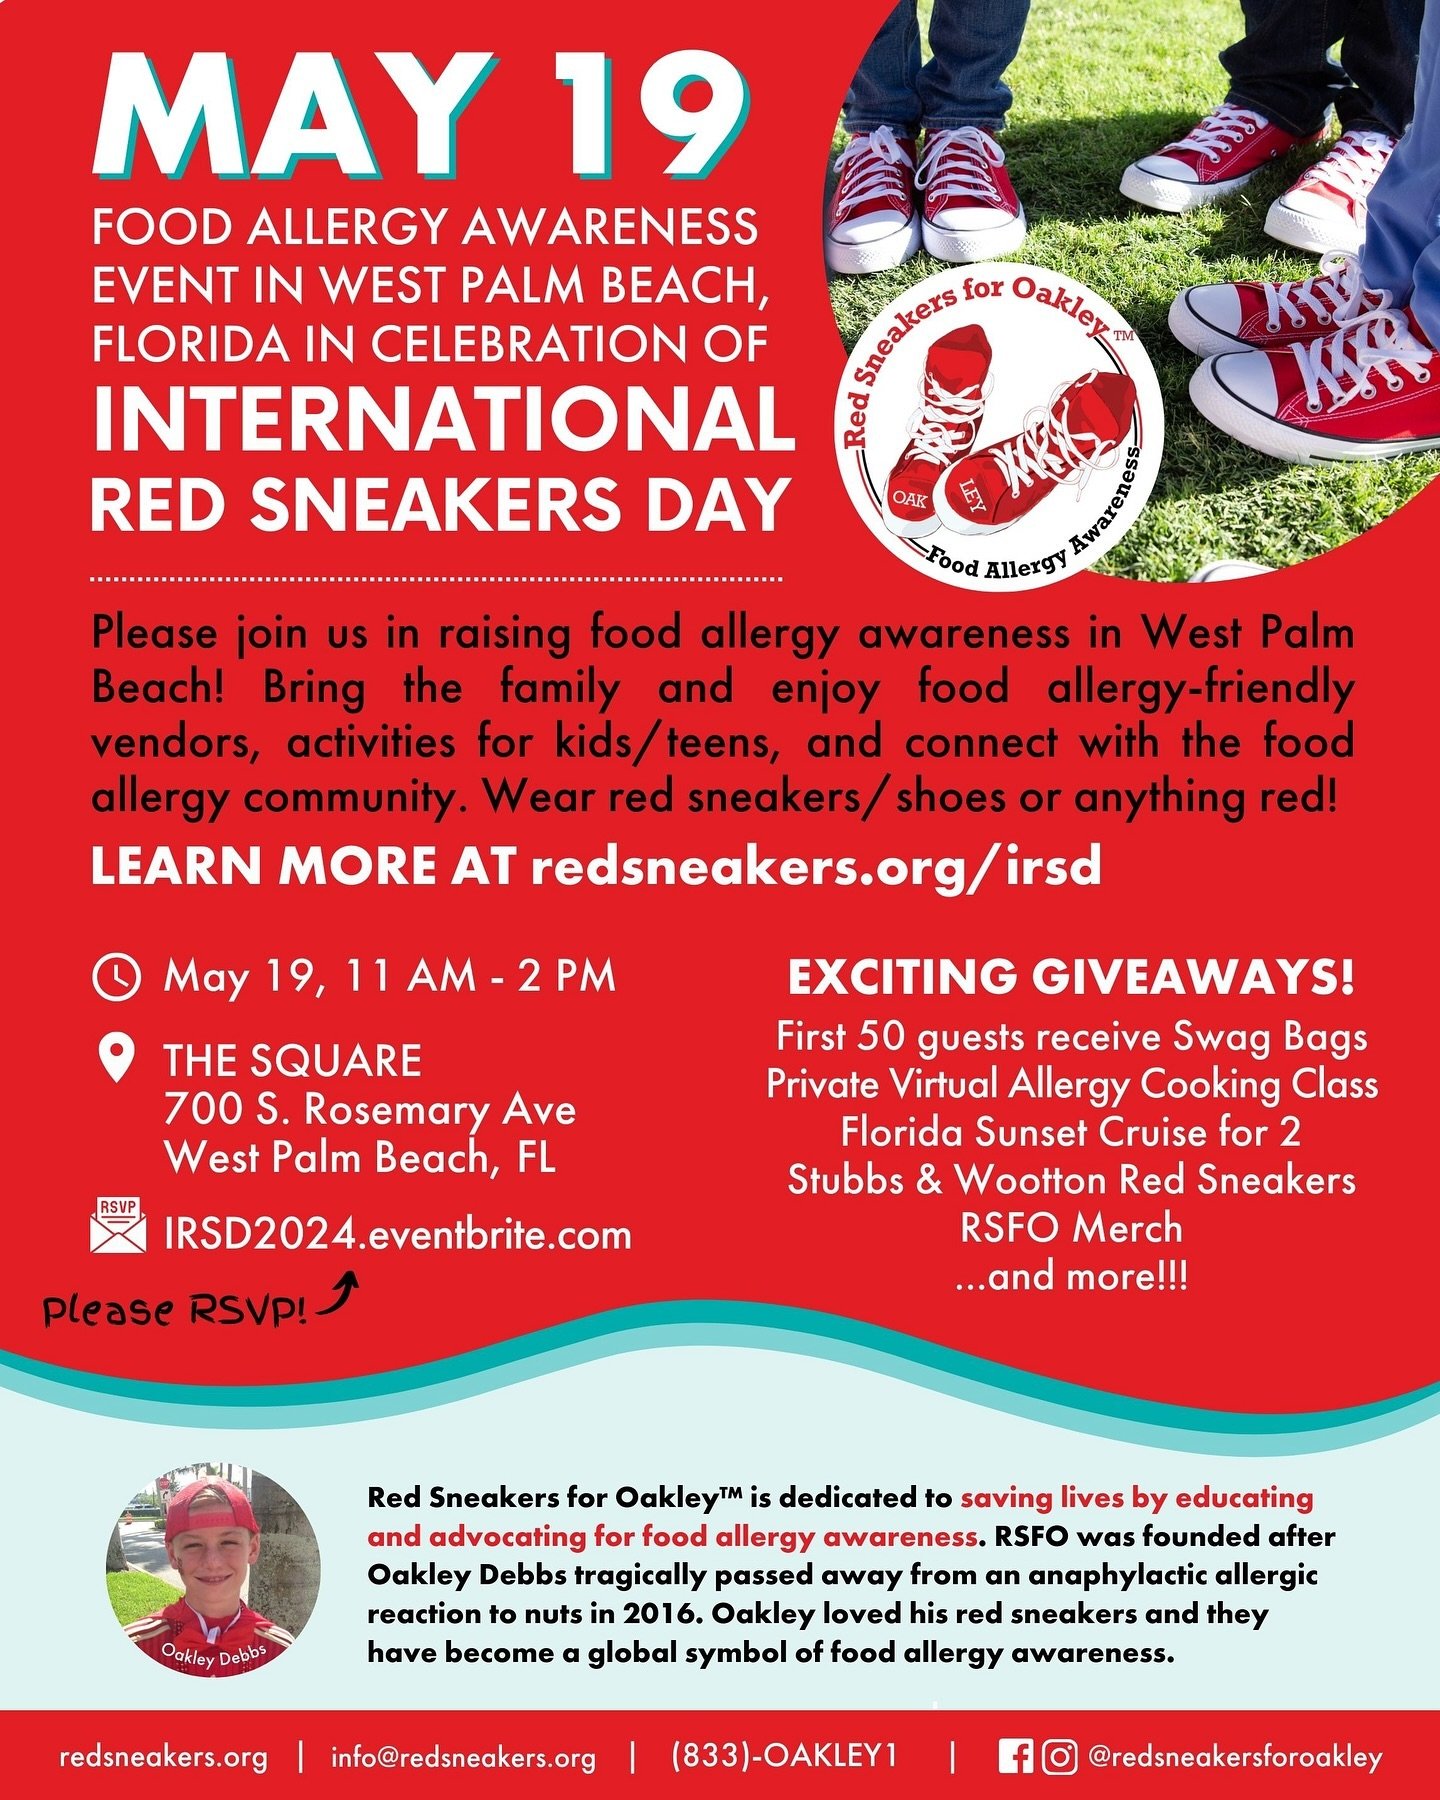 Please join us on May 19th at The Square in West Palm Beach, FL to spread food allergy awareness as we lead up to International Red Sneakers Day!! 

We have amazing guests appearances lined up, fun giveaways, lots of activities planned, and awesome s